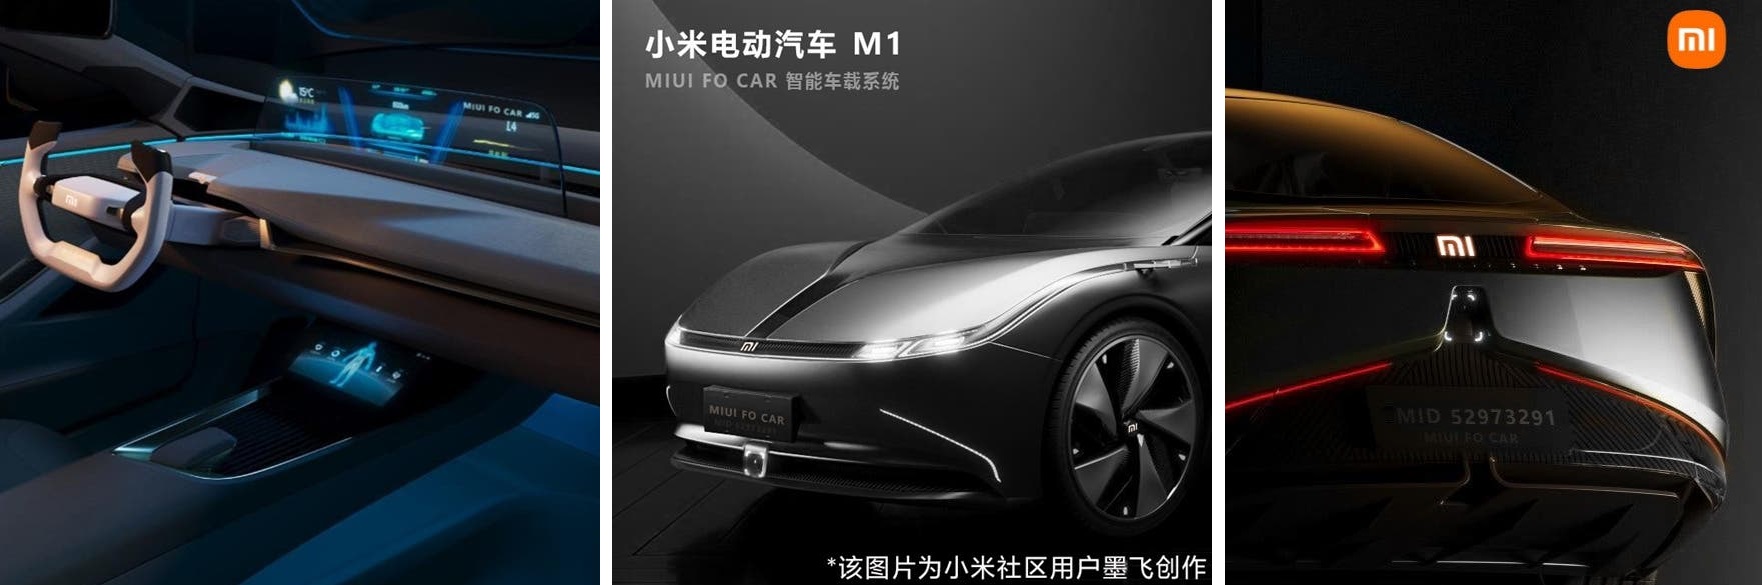 Quality renders of Xiaomi M1 car are published